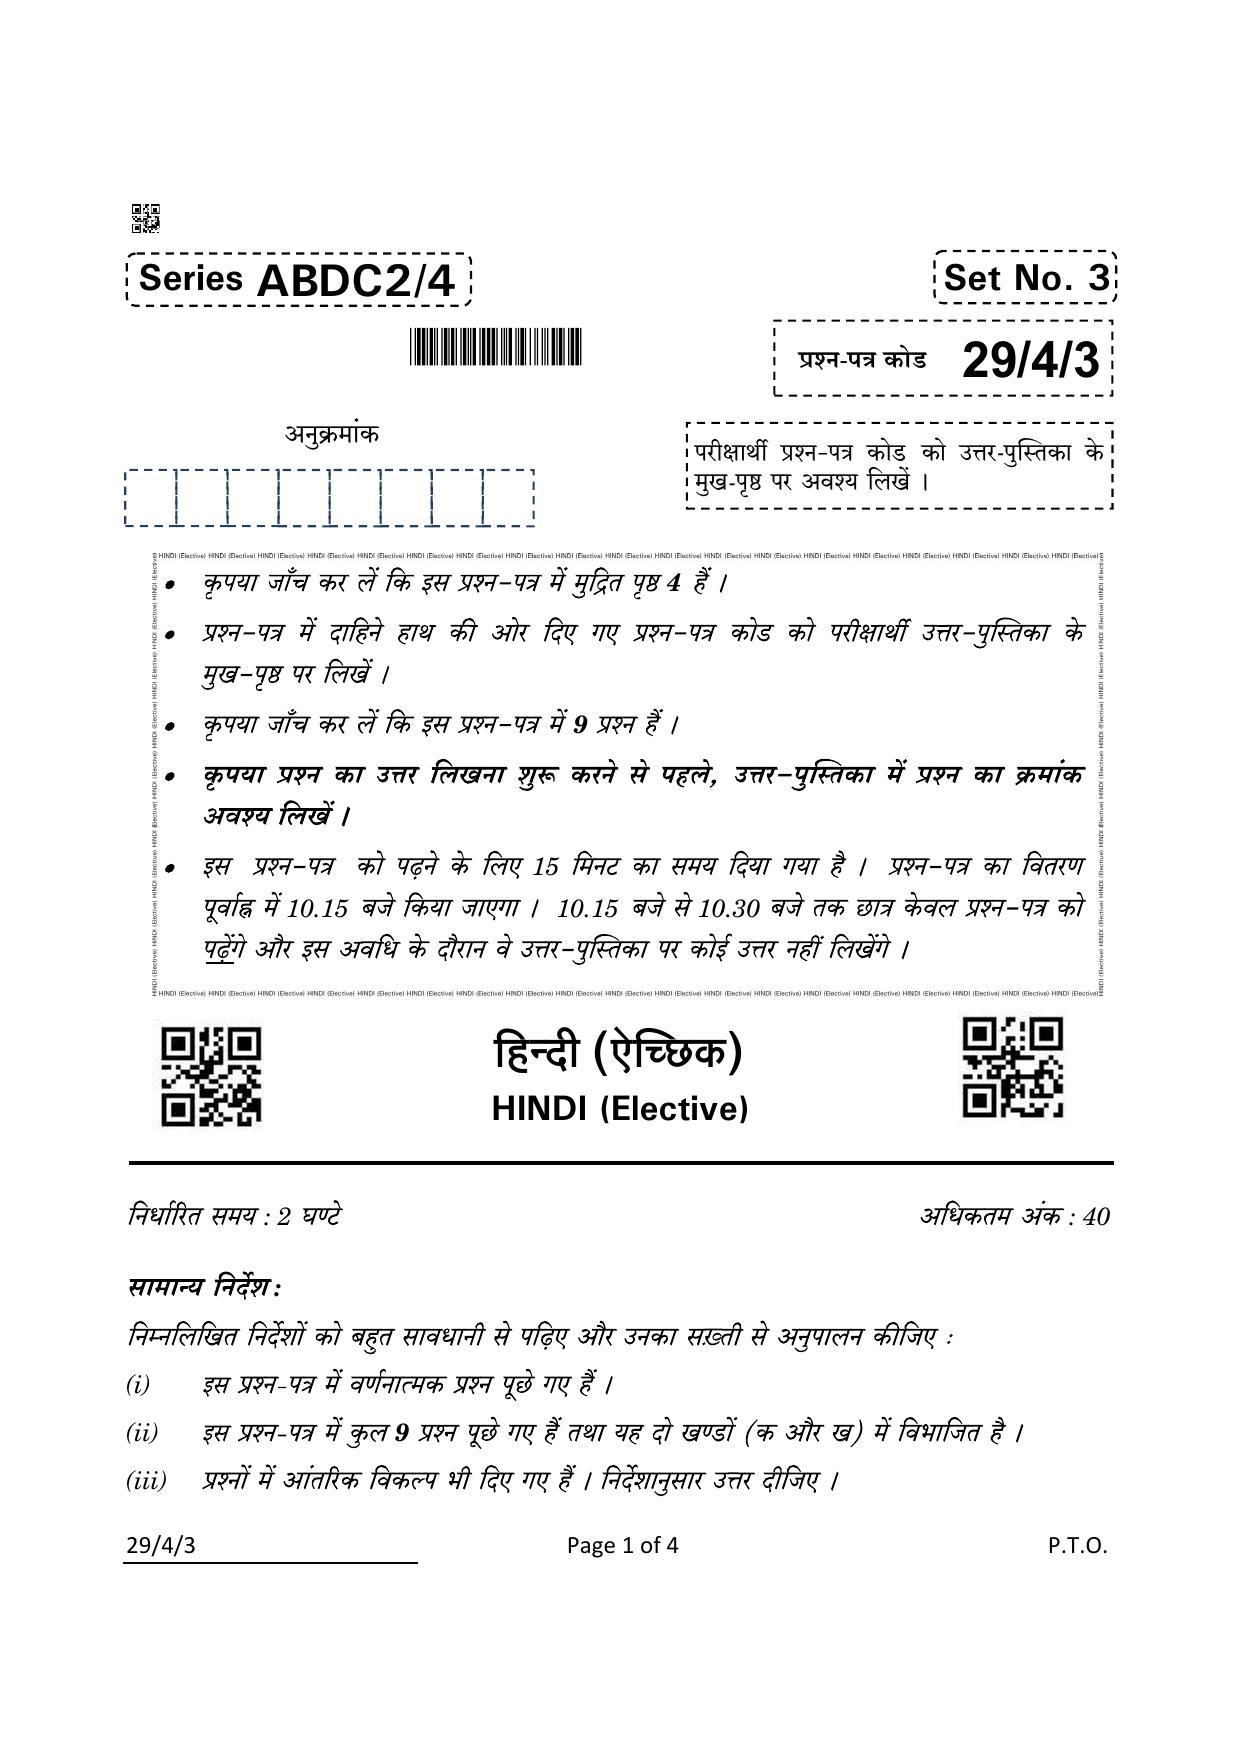 CBSE Class 12 29-4-3 Hindi Elective 2022 Question Paper - Page 1